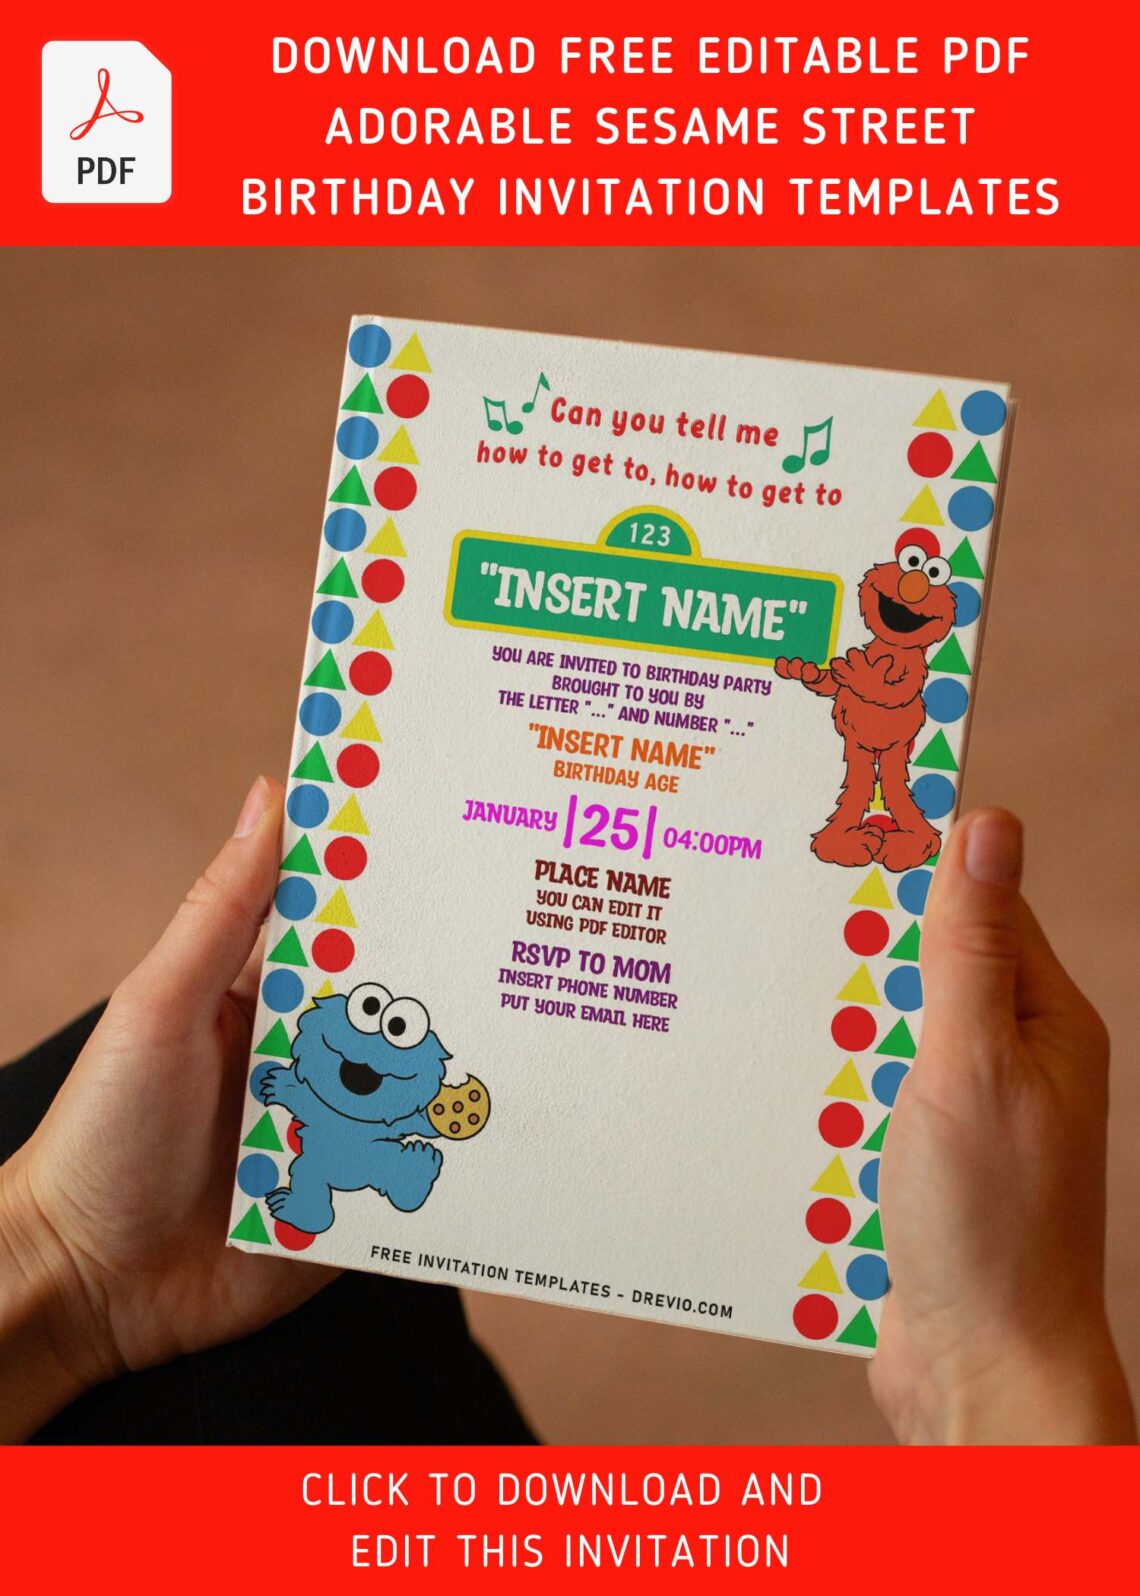 (Free Editable PDF) Adorable Sesame Street Birthday Invitation Templates with cute baby Cookie Monster